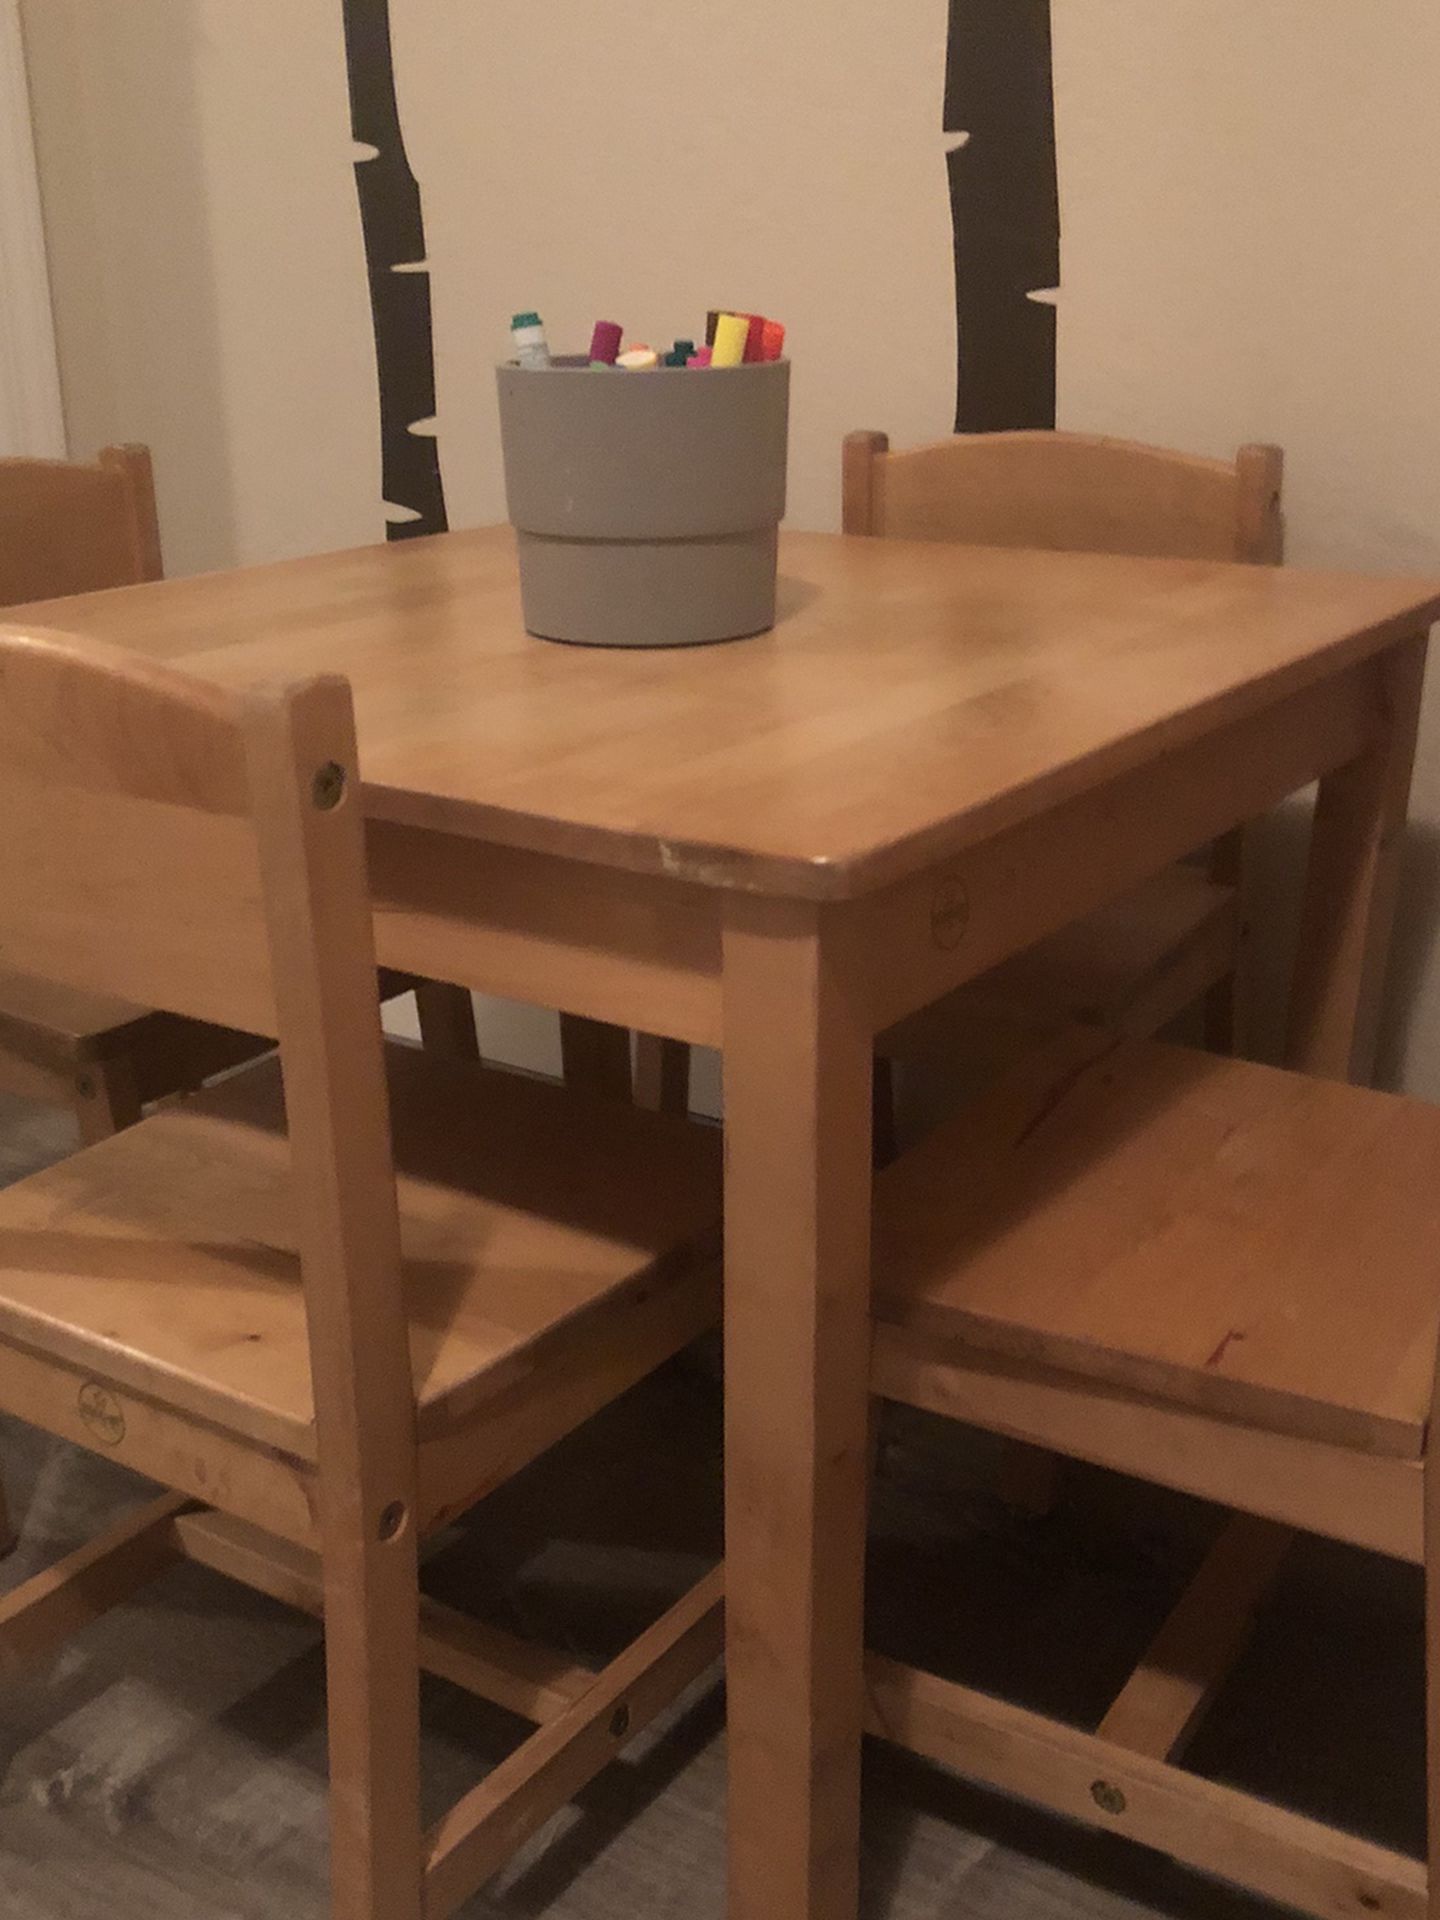 Kidkraft Honey Farmhouse Wooden Table And 4 Chairs